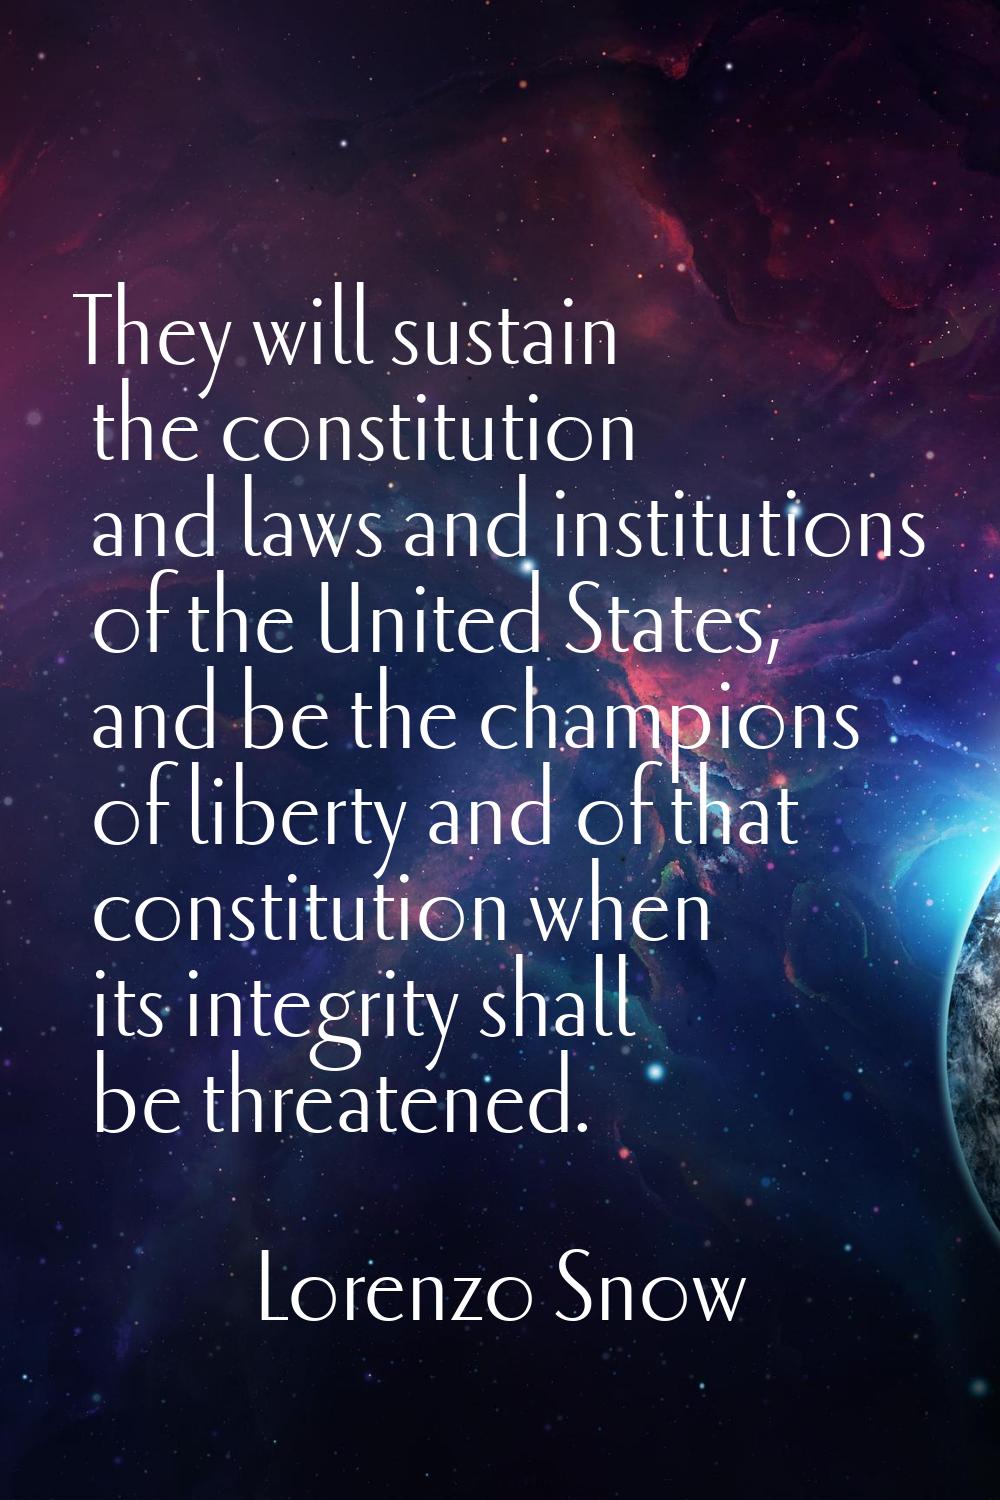 They will sustain the constitution and laws and institutions of the United States, and be the champ